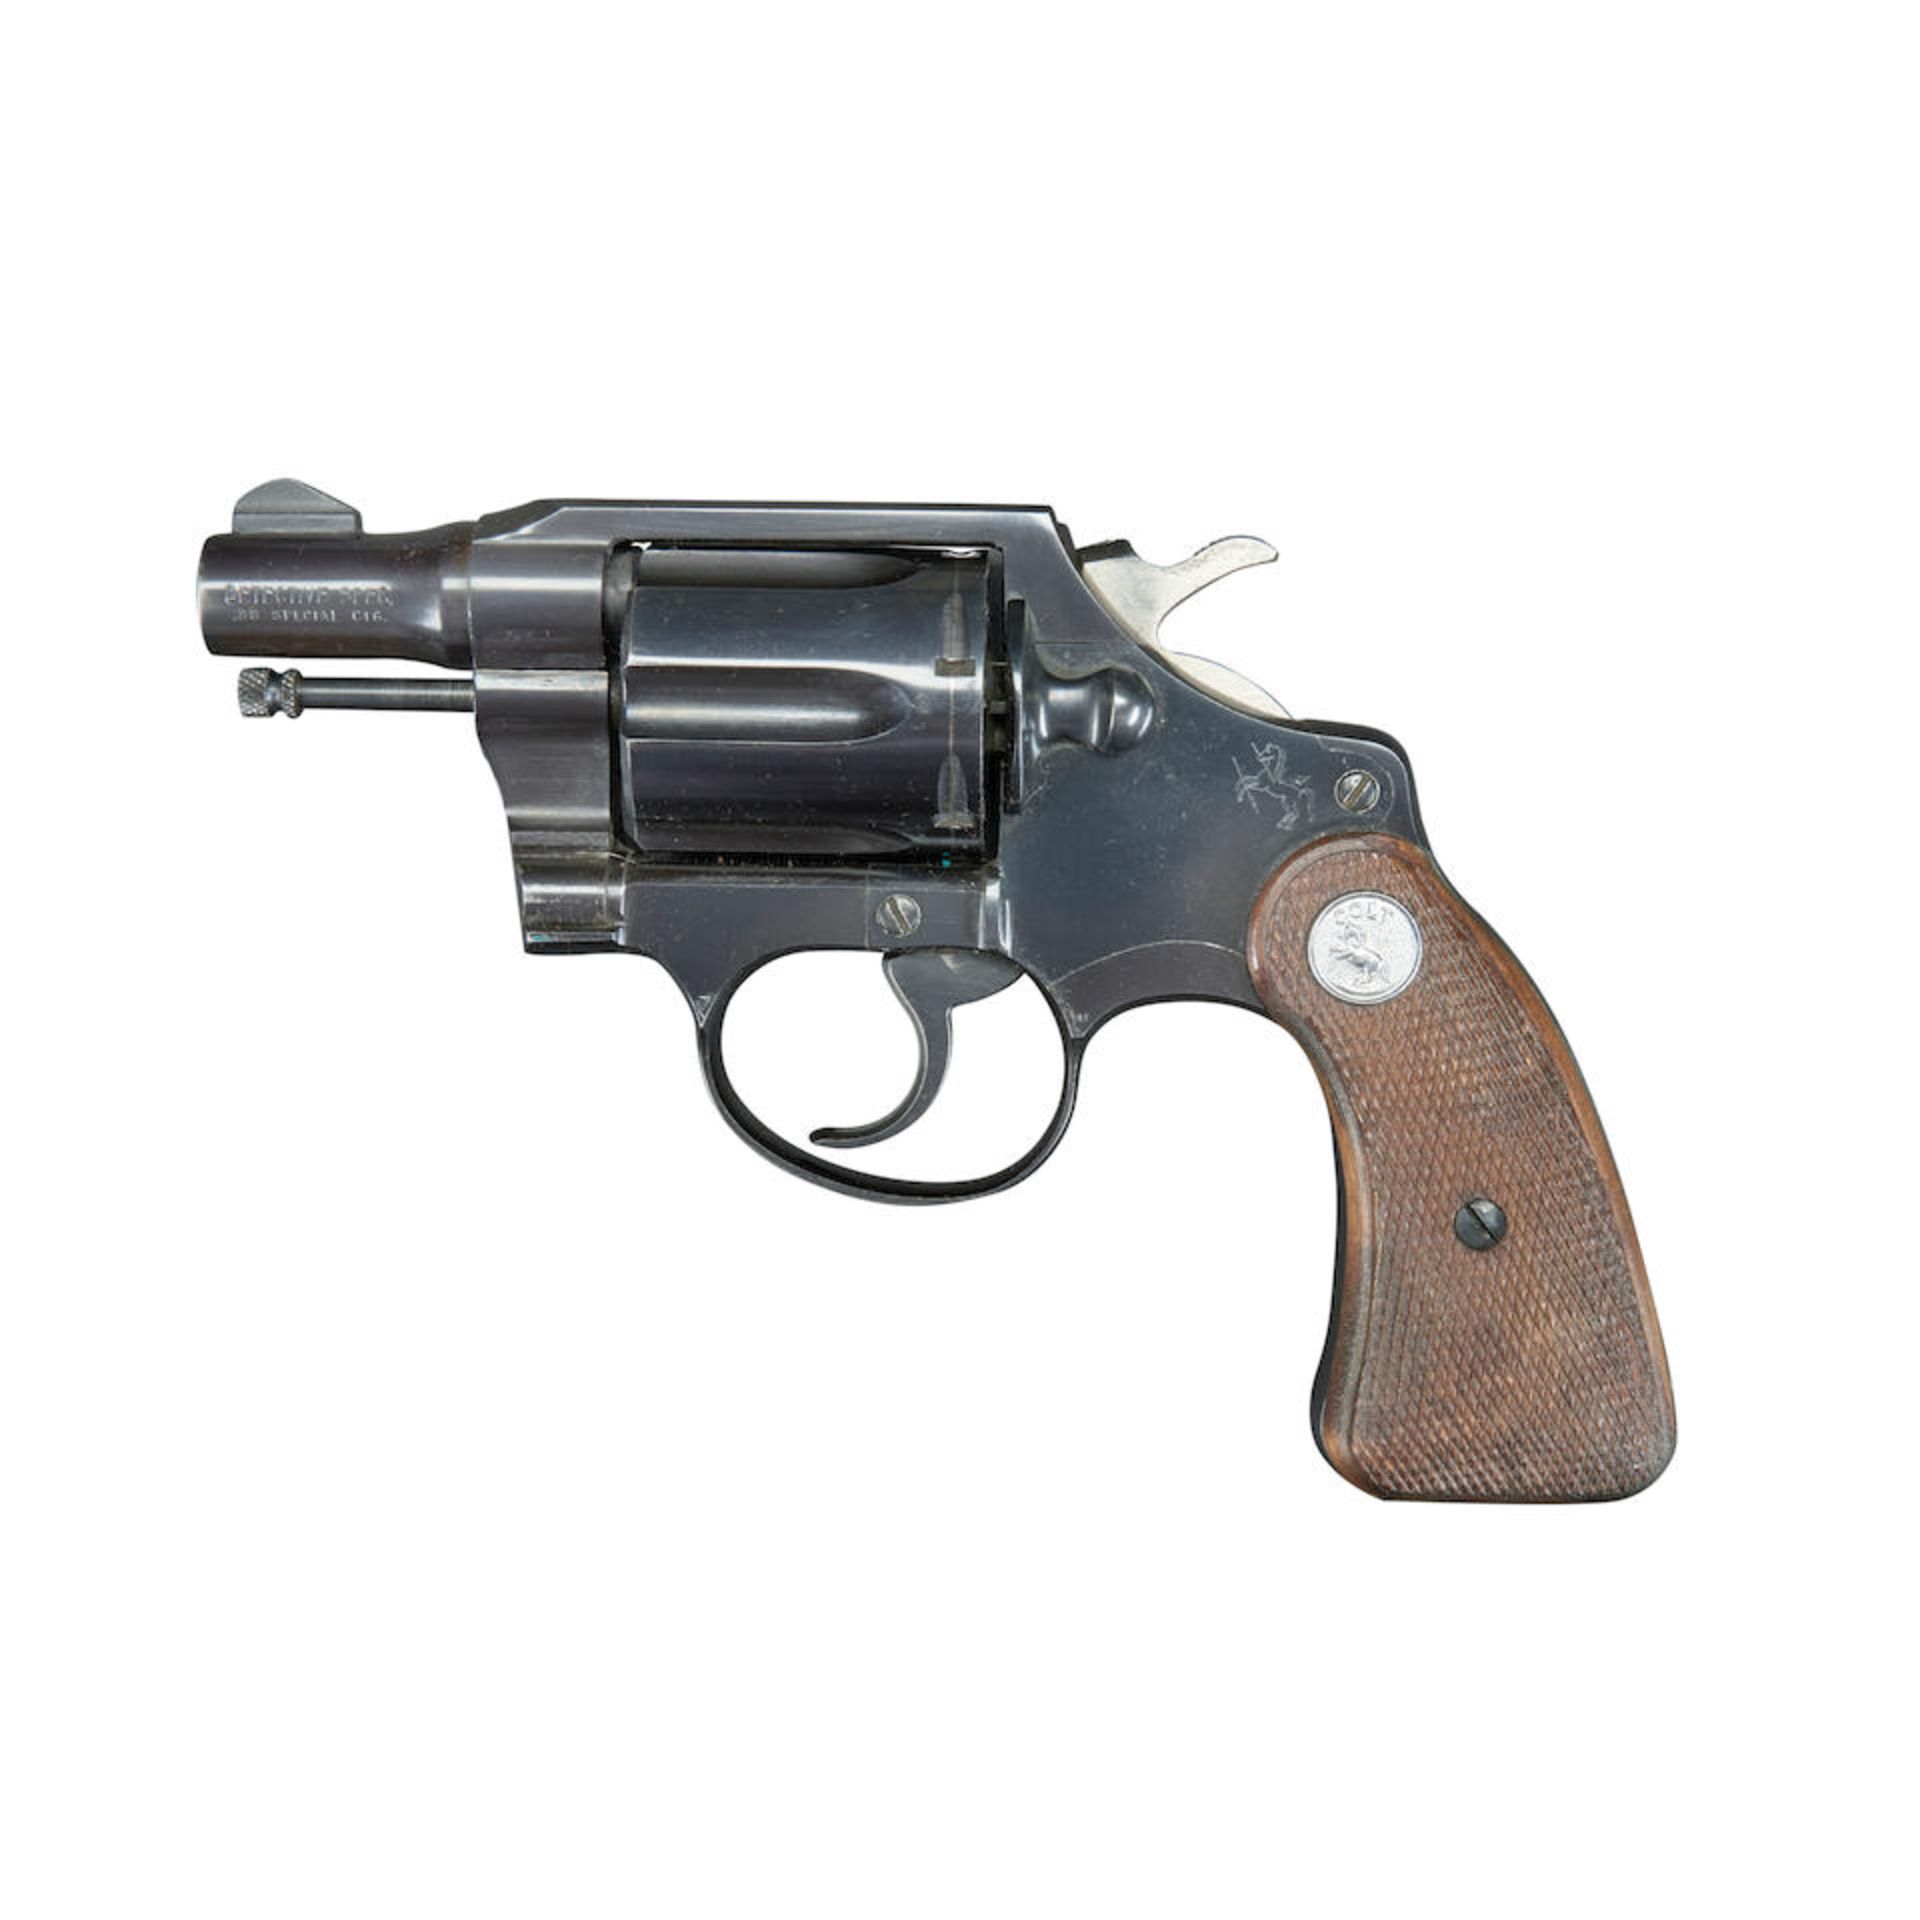 Colt Detective Special Double Action Revolver, Curio or Relic firearm - Image 2 of 2